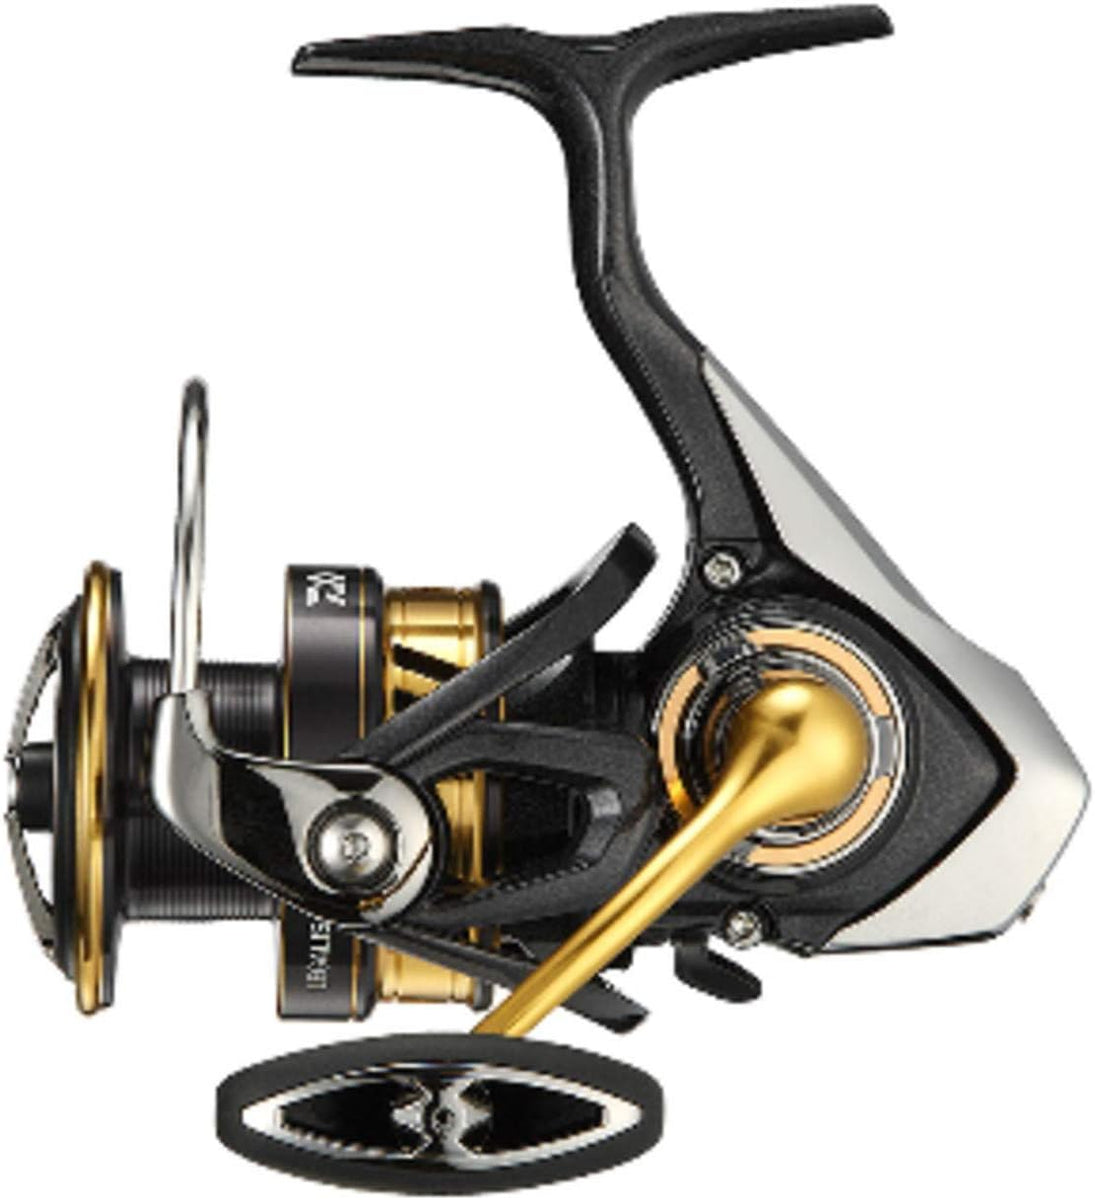 Daiwa LEGALIS LT3000-CXH Spinning Reel – EX TOOLS JAPAN, High quality tools  from Japan